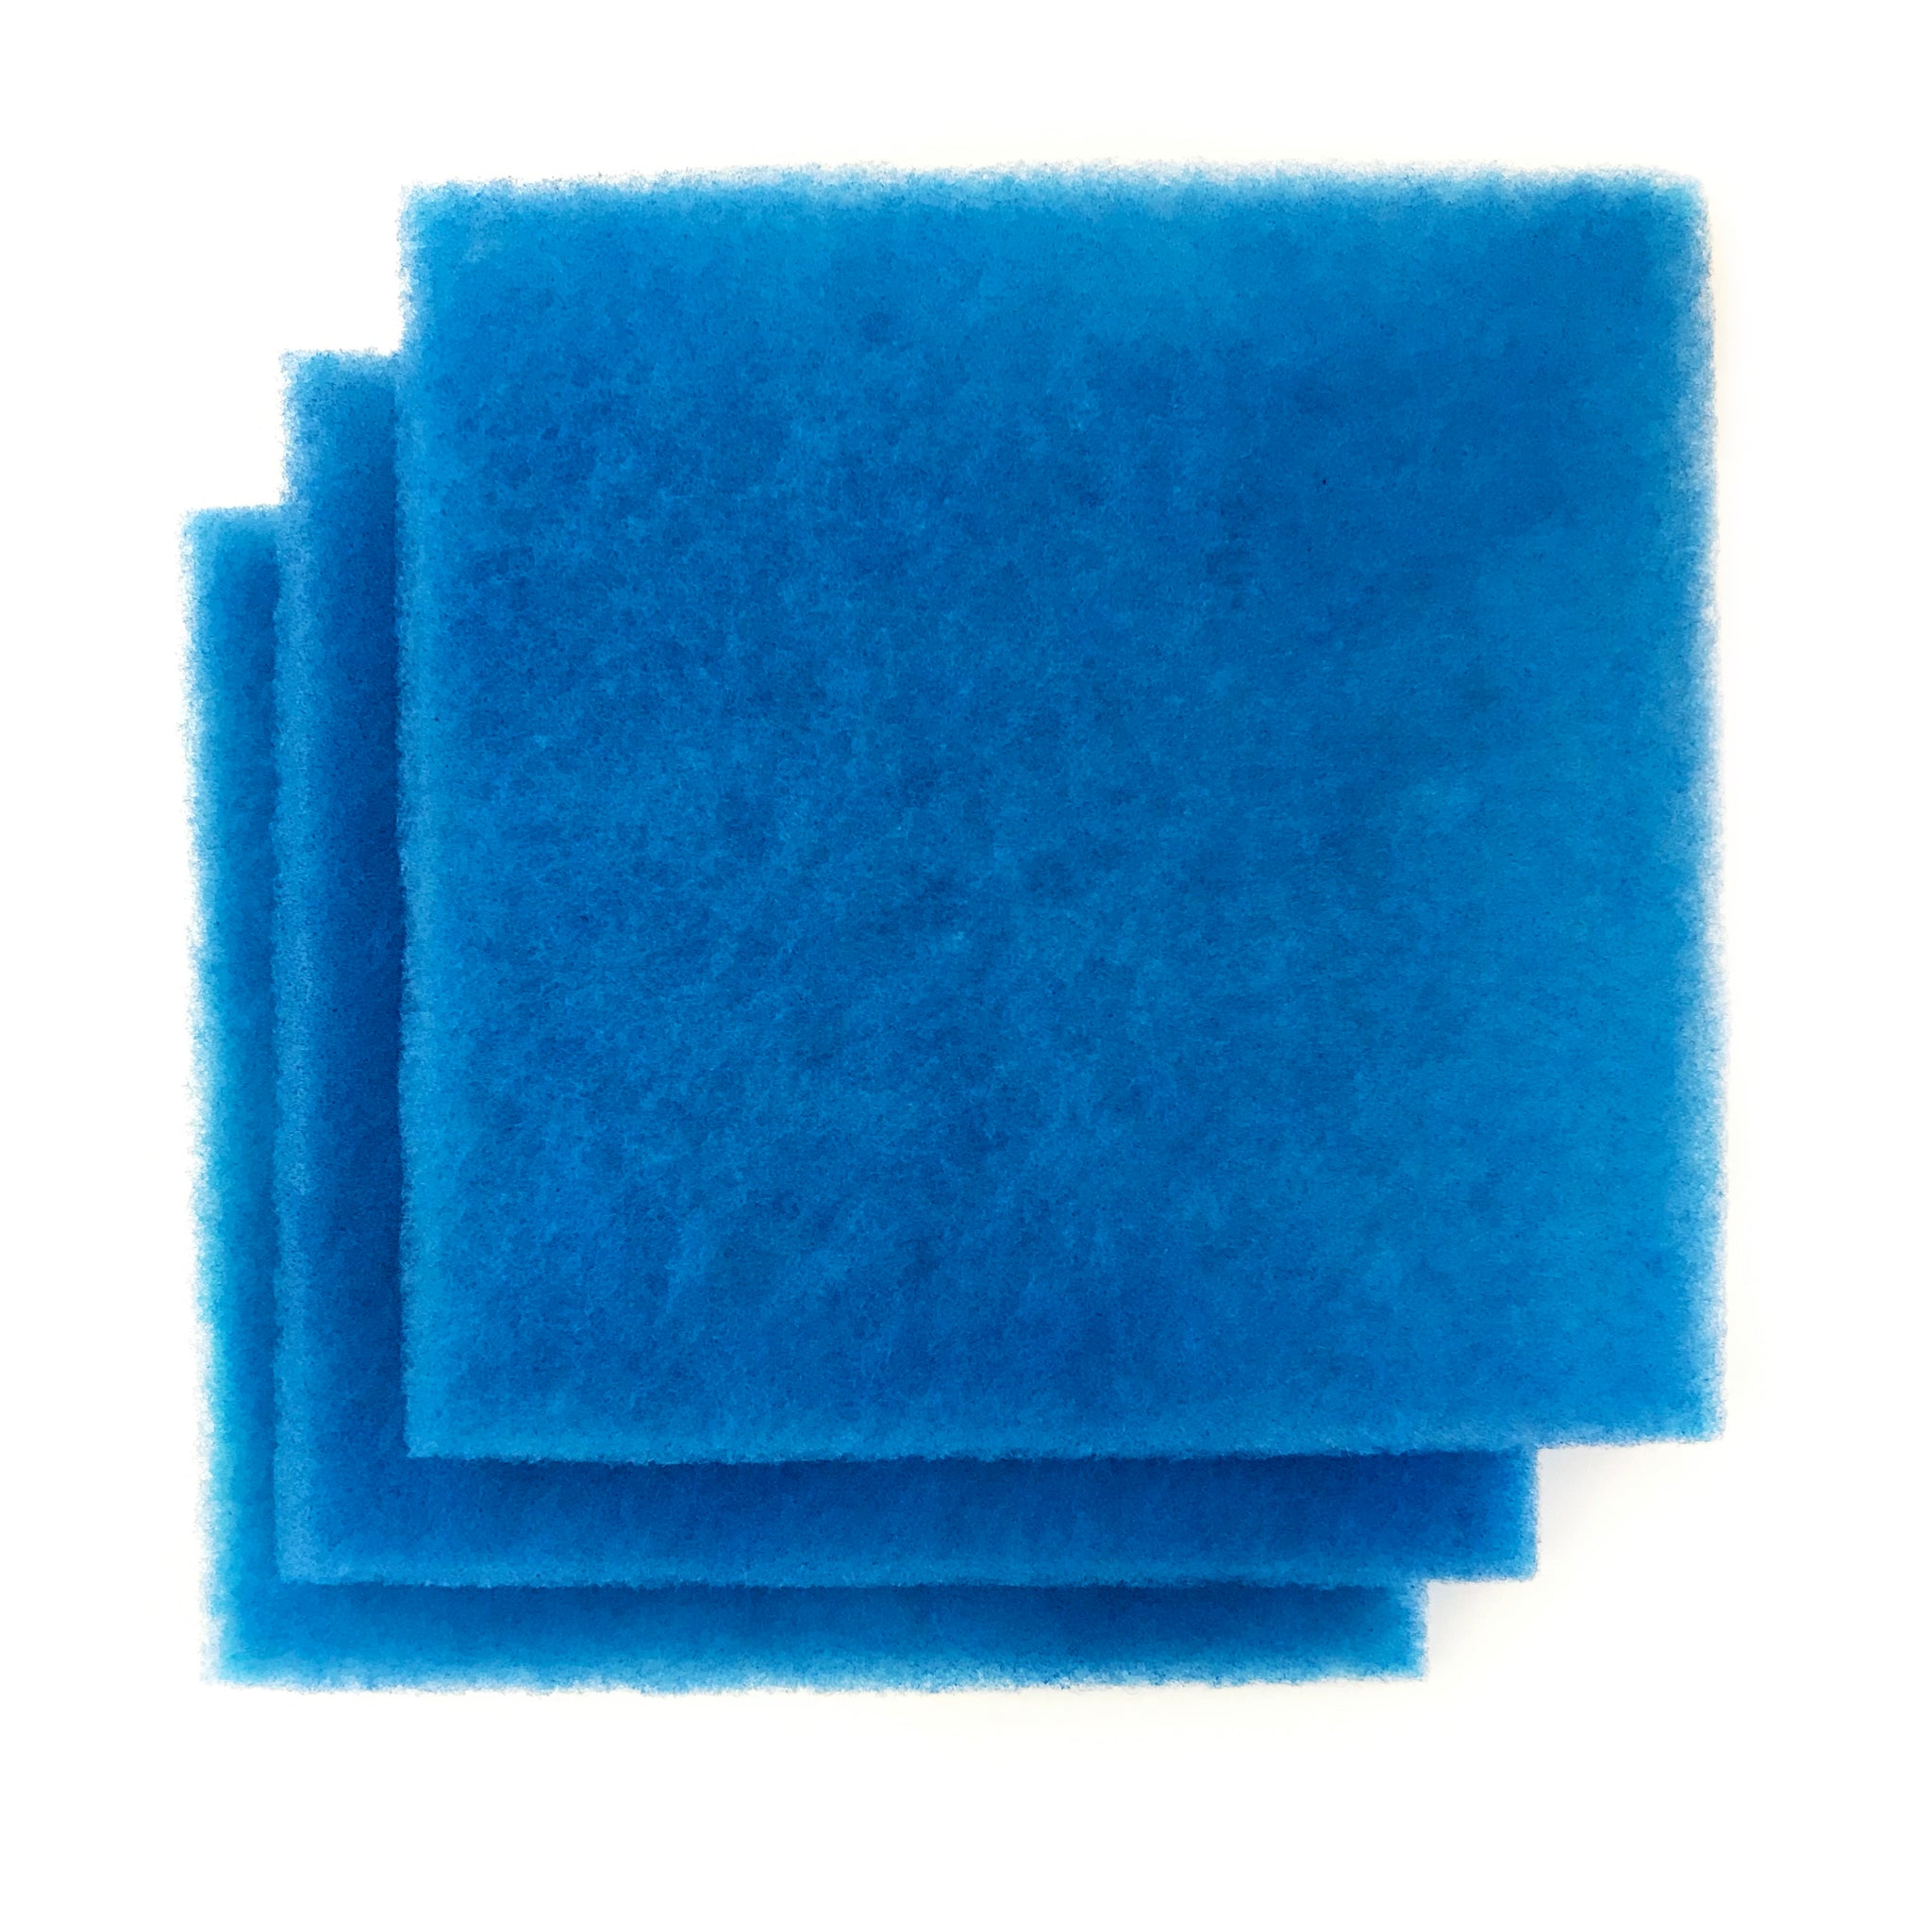 Replacement Media Blue/White (3pcs) for Pondmaster 1000 or 2000